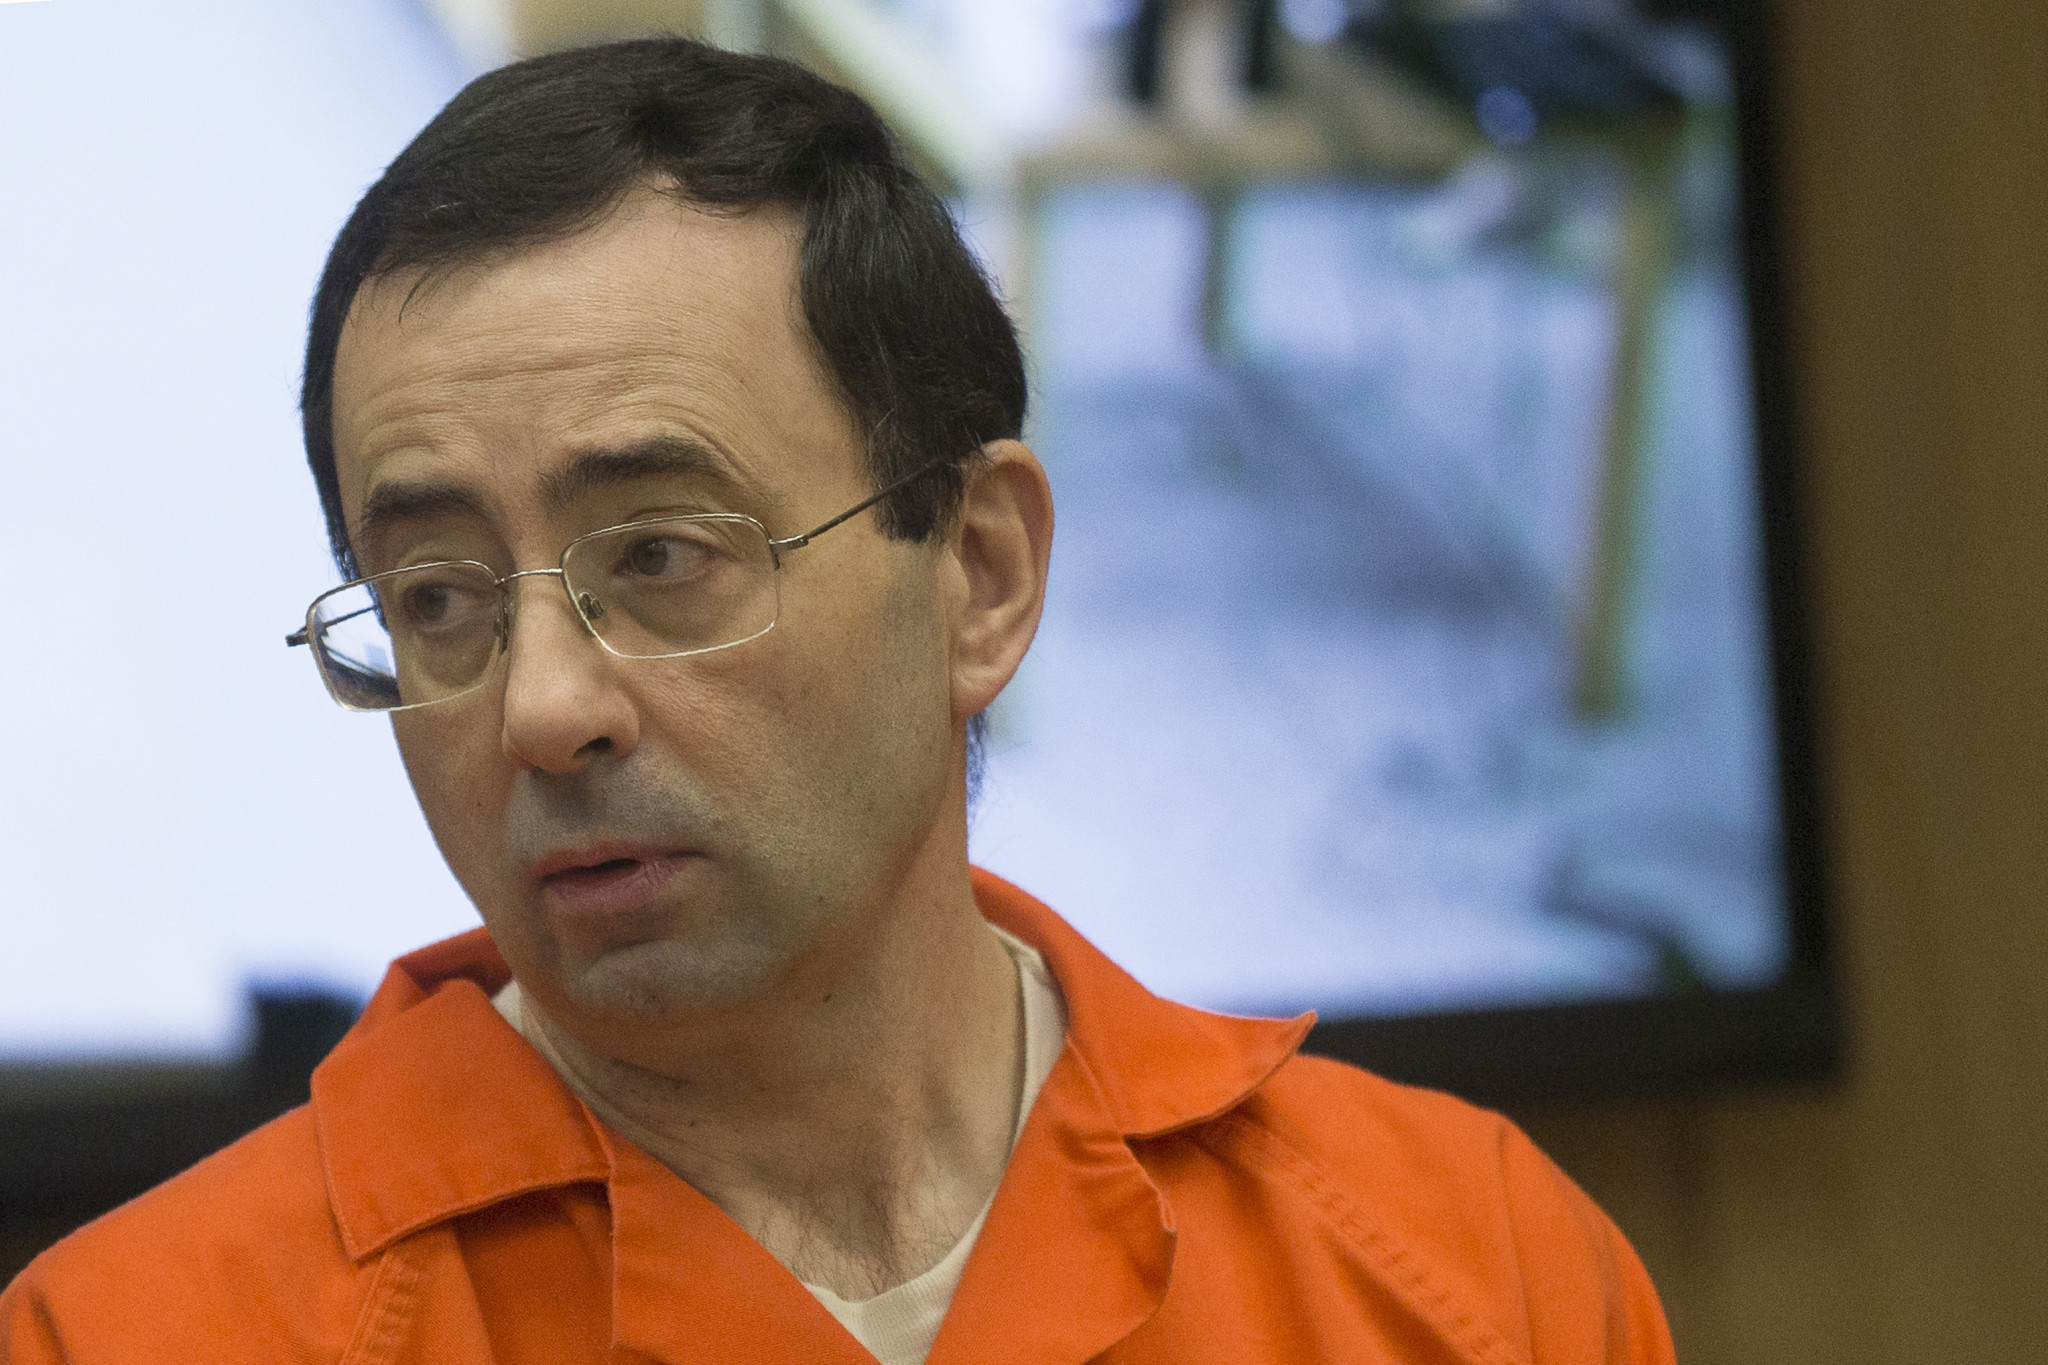 The Philadelphia Indemnity Insurance Company wants a judge to determine that it is not accountable for multiple lawsuits filed in recent years against the USOC, including those that have come in the wake of the Larry Nassar scandal ©Getty Images